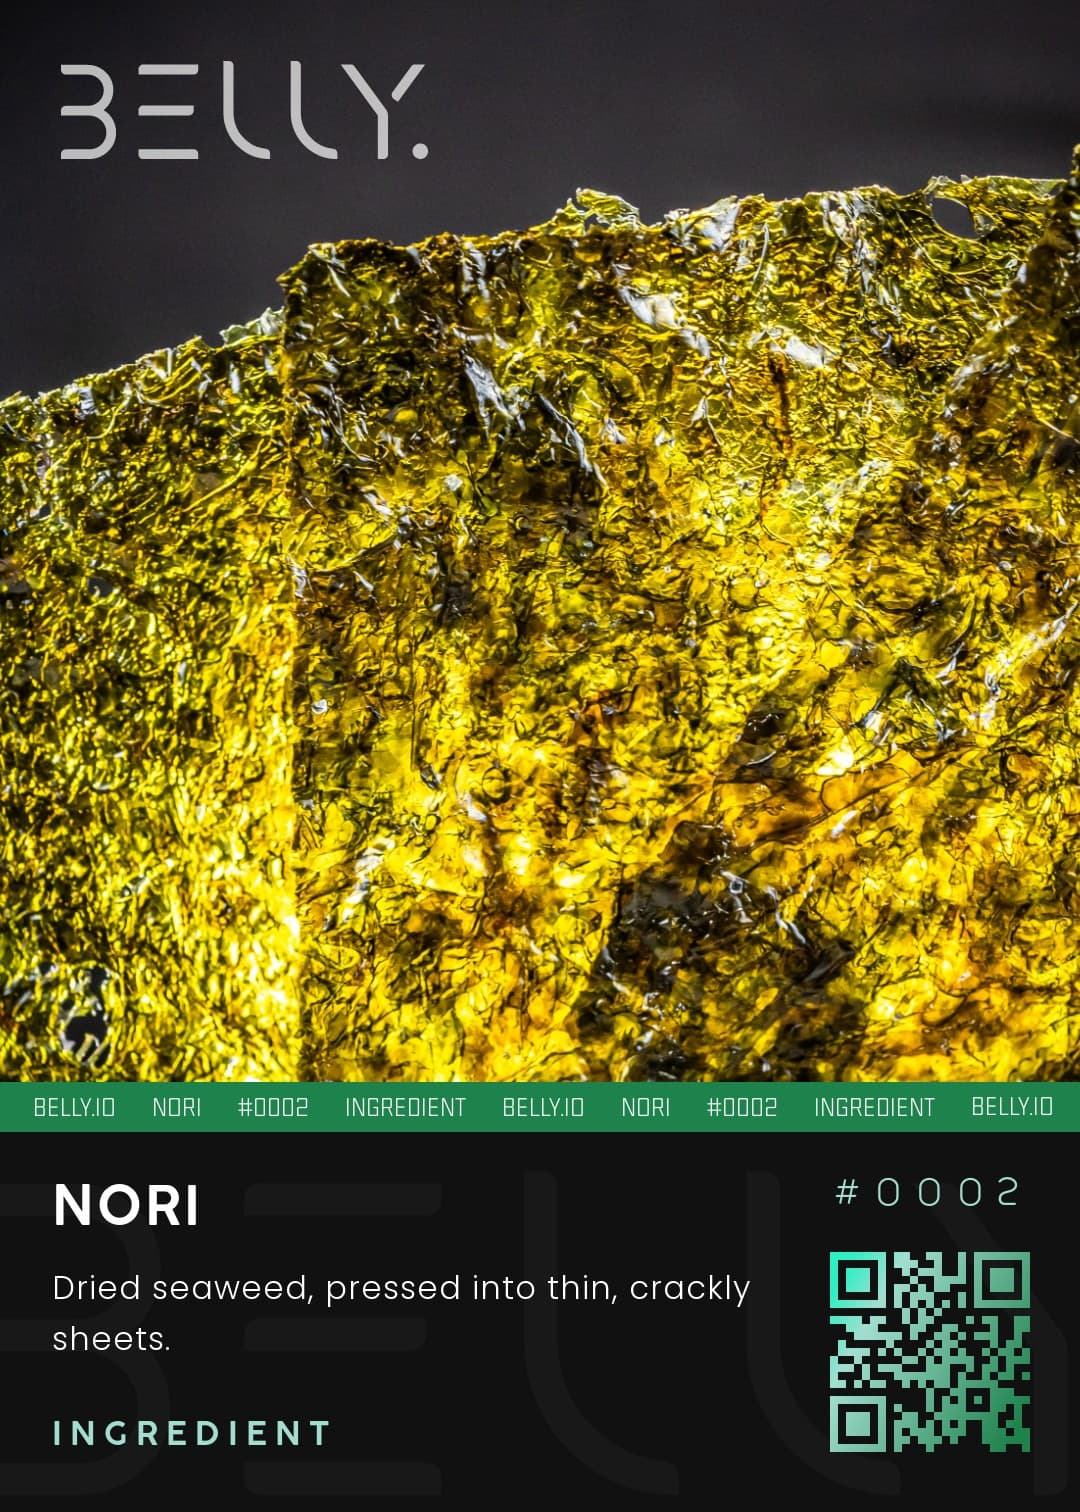 Nori - Dried seaweed, pressed into thin, crackly sheets.